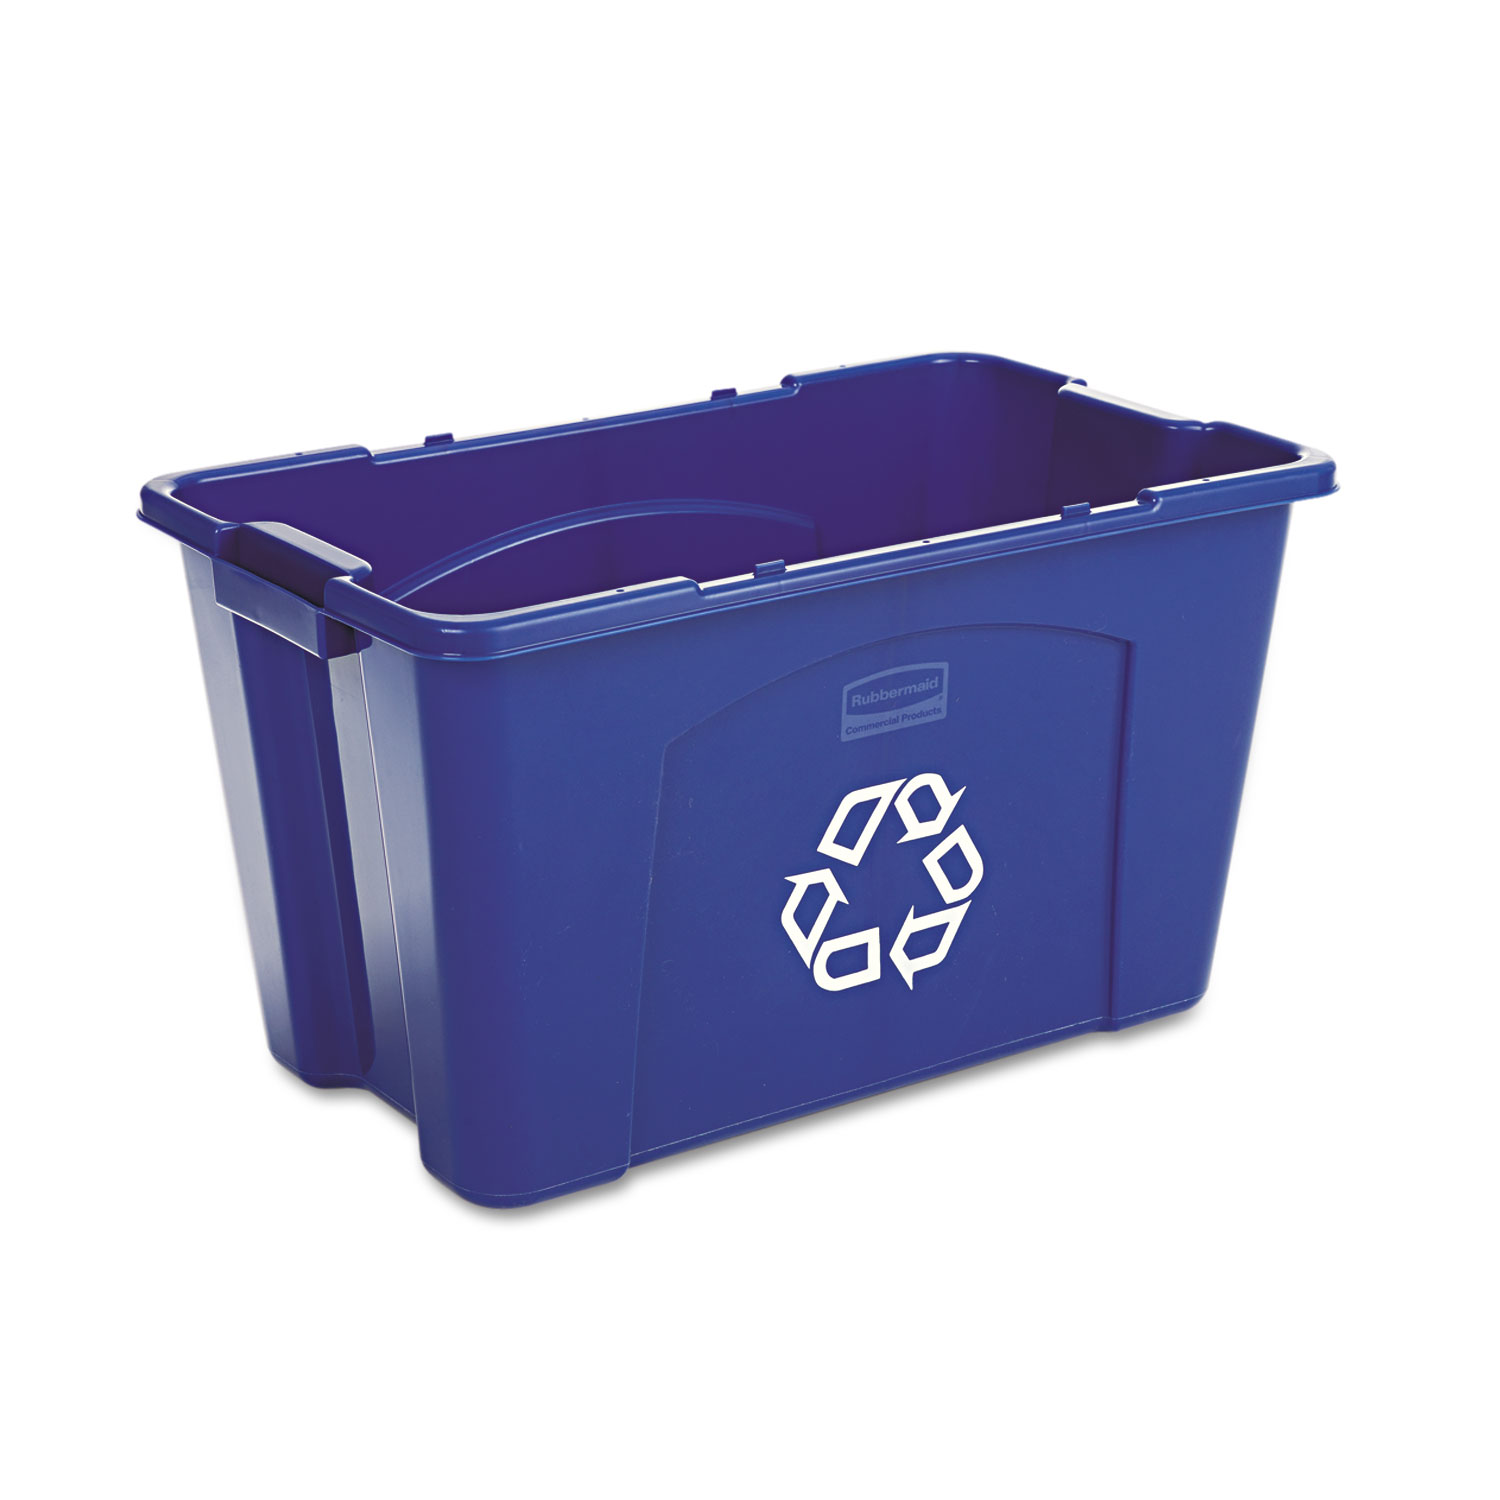  Rubbermaid Commercial FG571873BLUE Stacking Recycle Bin, Rectangular, Polyethylene, 18 gal, Blue (RCP571873BE) 